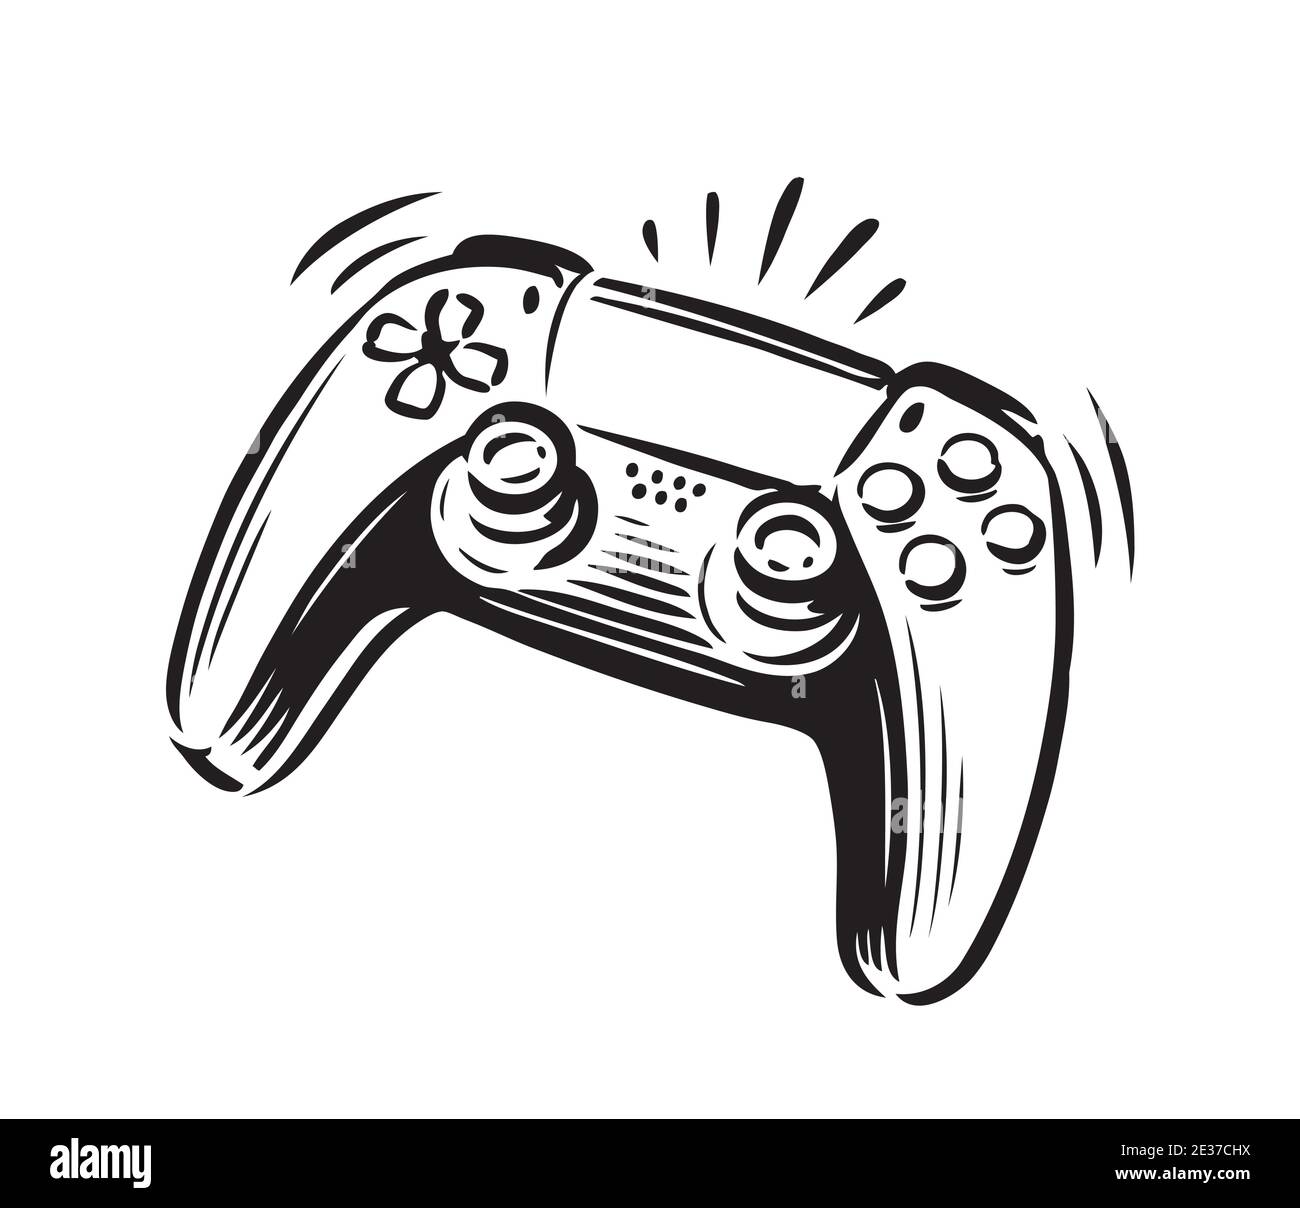 Joystick vector Cut Out Stock Images & Pictures - Alamy